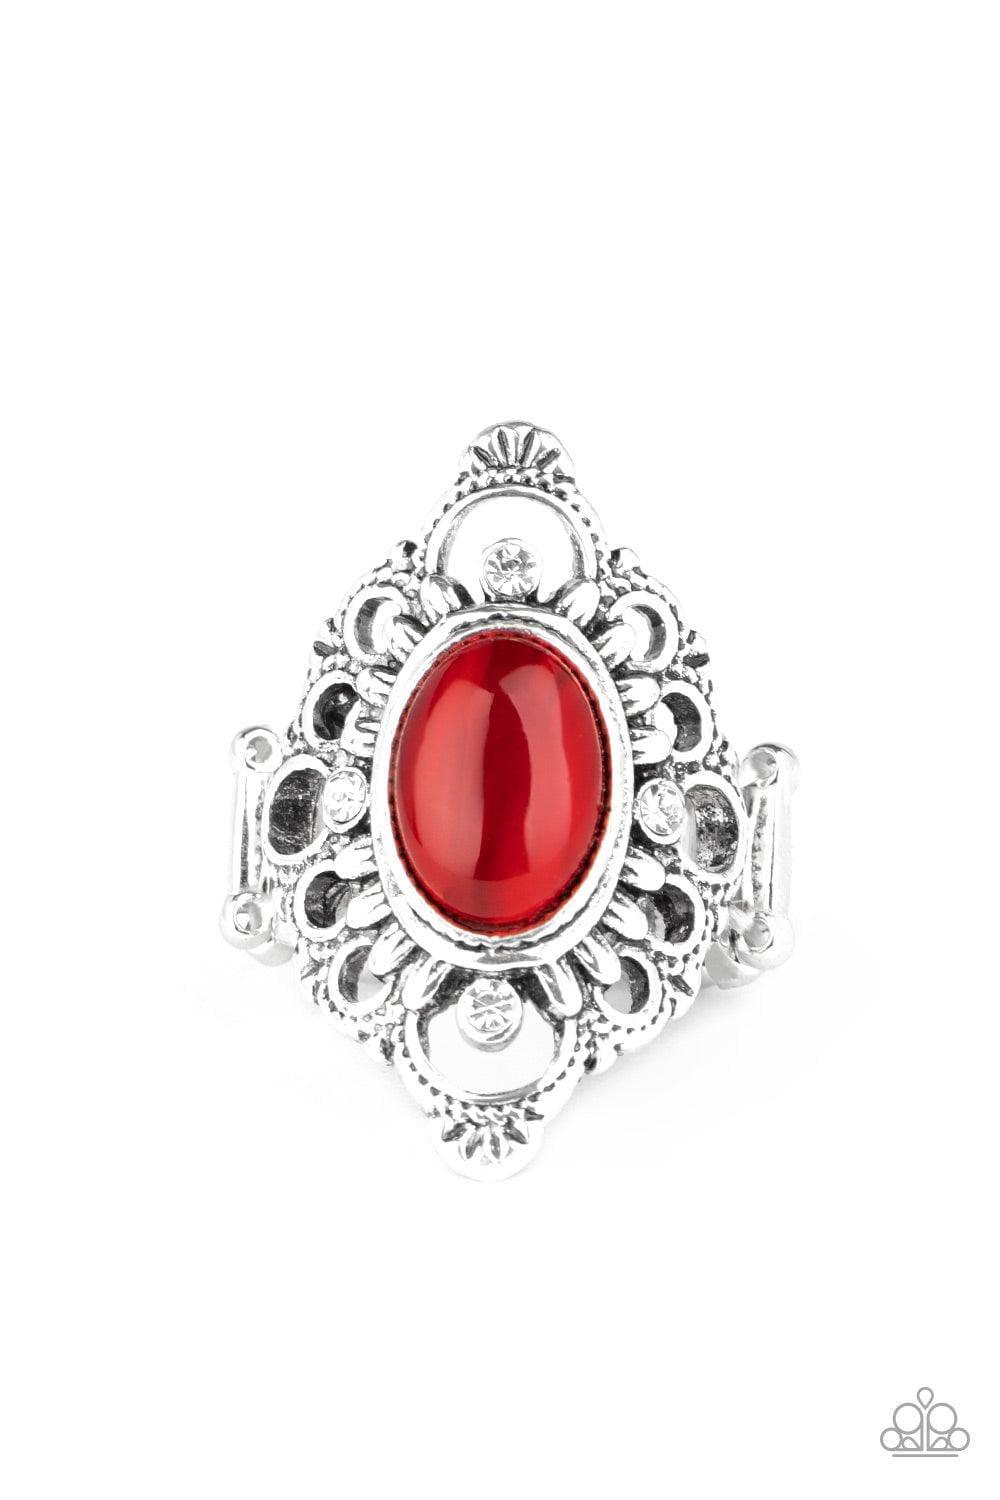 Paparazzi Accessories - Elegantly Enchanted - Red Ring - Bling by JessieK